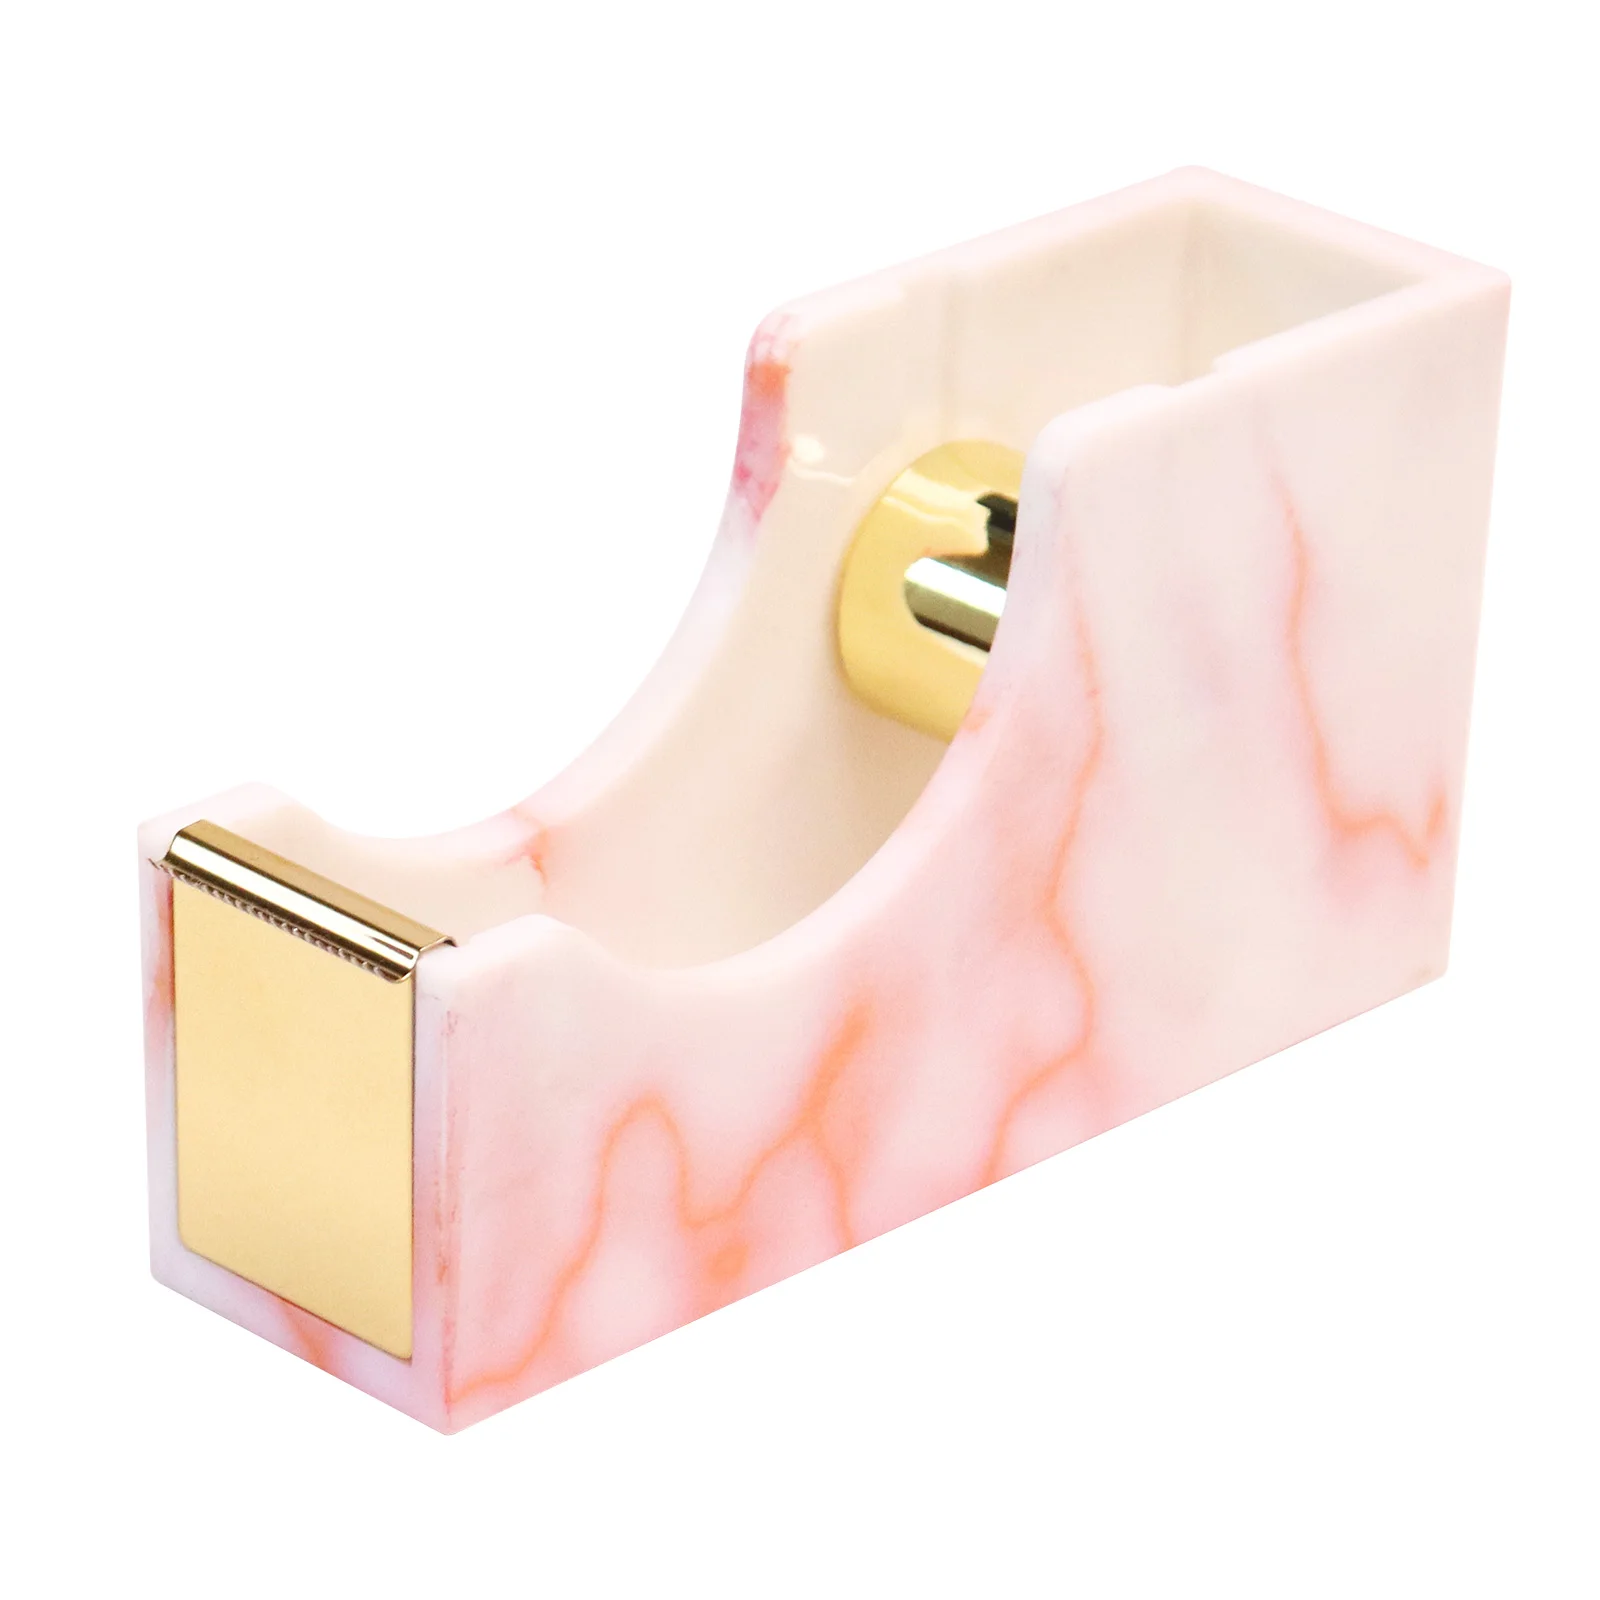 Pink Marbled Washi Tape Dispenser Non-Slip Base Design Gold Stainless Steel Metal Blade School Office Stationery Supplies